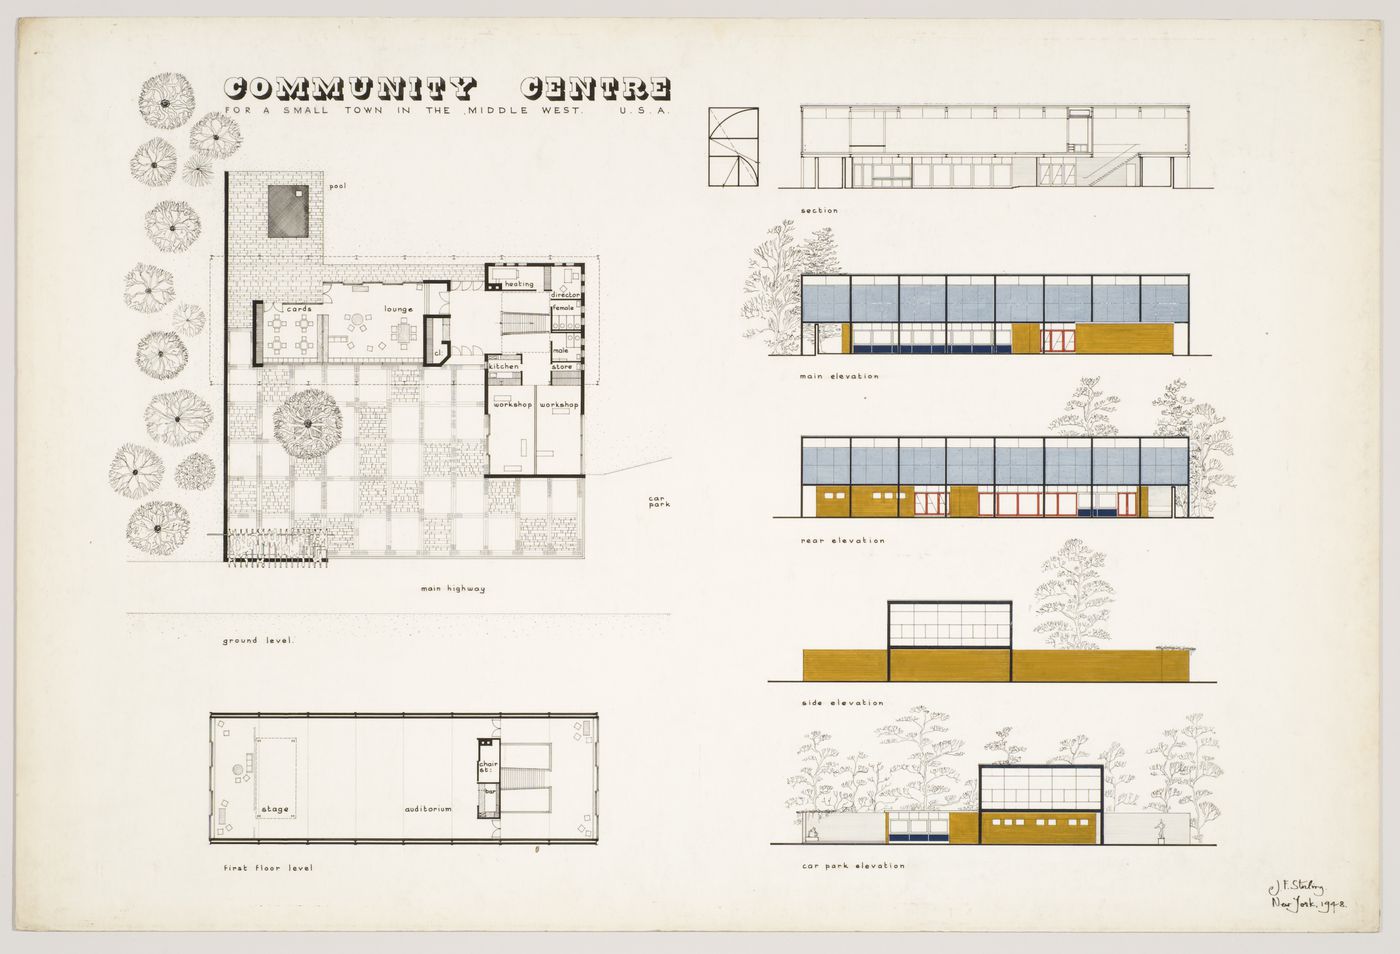 Elevations, plans for the ground and first floor, and a section of a Community centre for a small town in the Middle West, U.S.A.